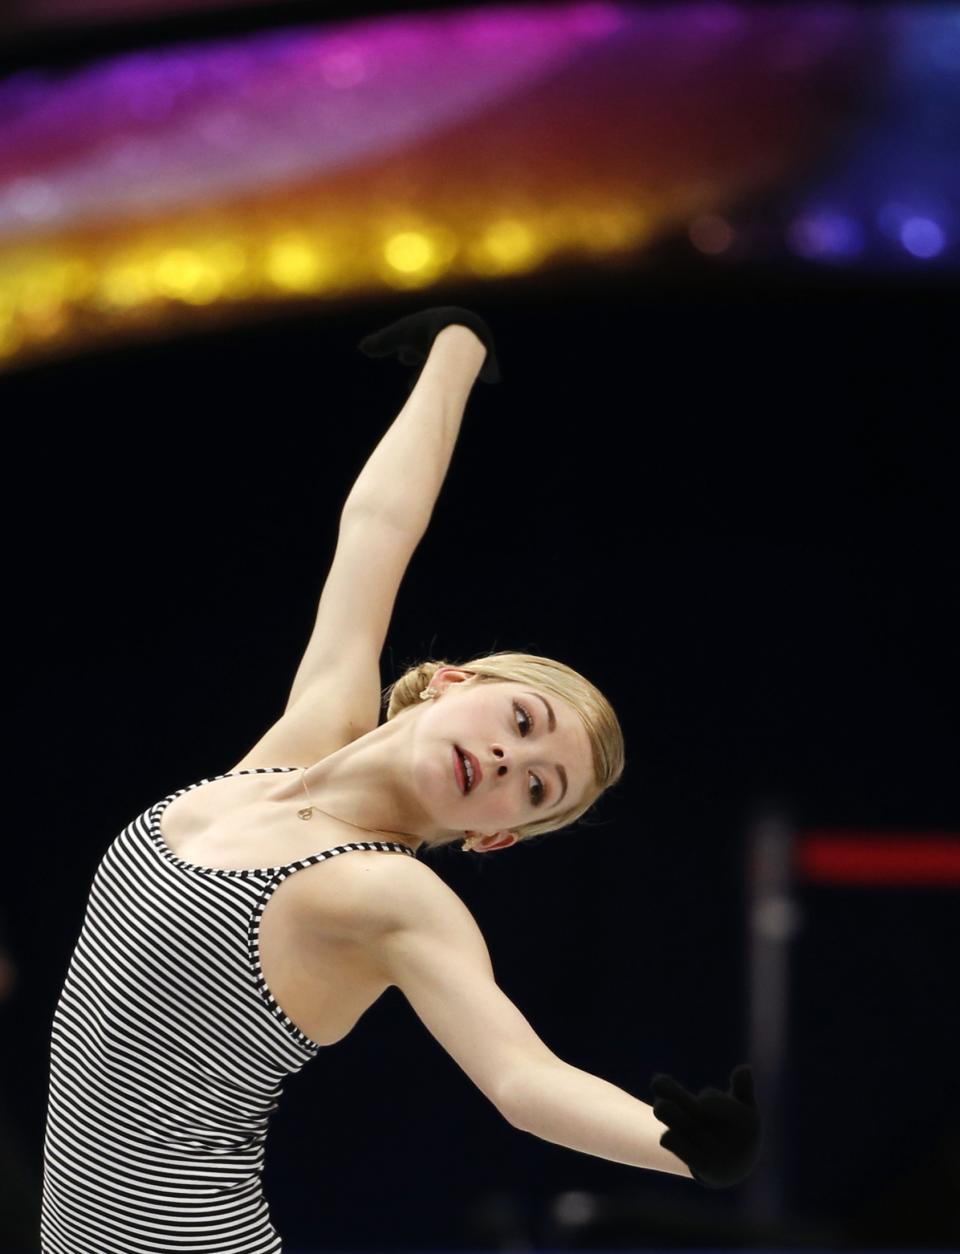 Gracie Gold of the U.S. attends a training session at the ISU World Figure Skating Championships in Saitama, north of Tokyo, March 25, 2014. REUTERS/Toru Hanai (JAPAN - Tags: SPORT FIGURE SKATING)